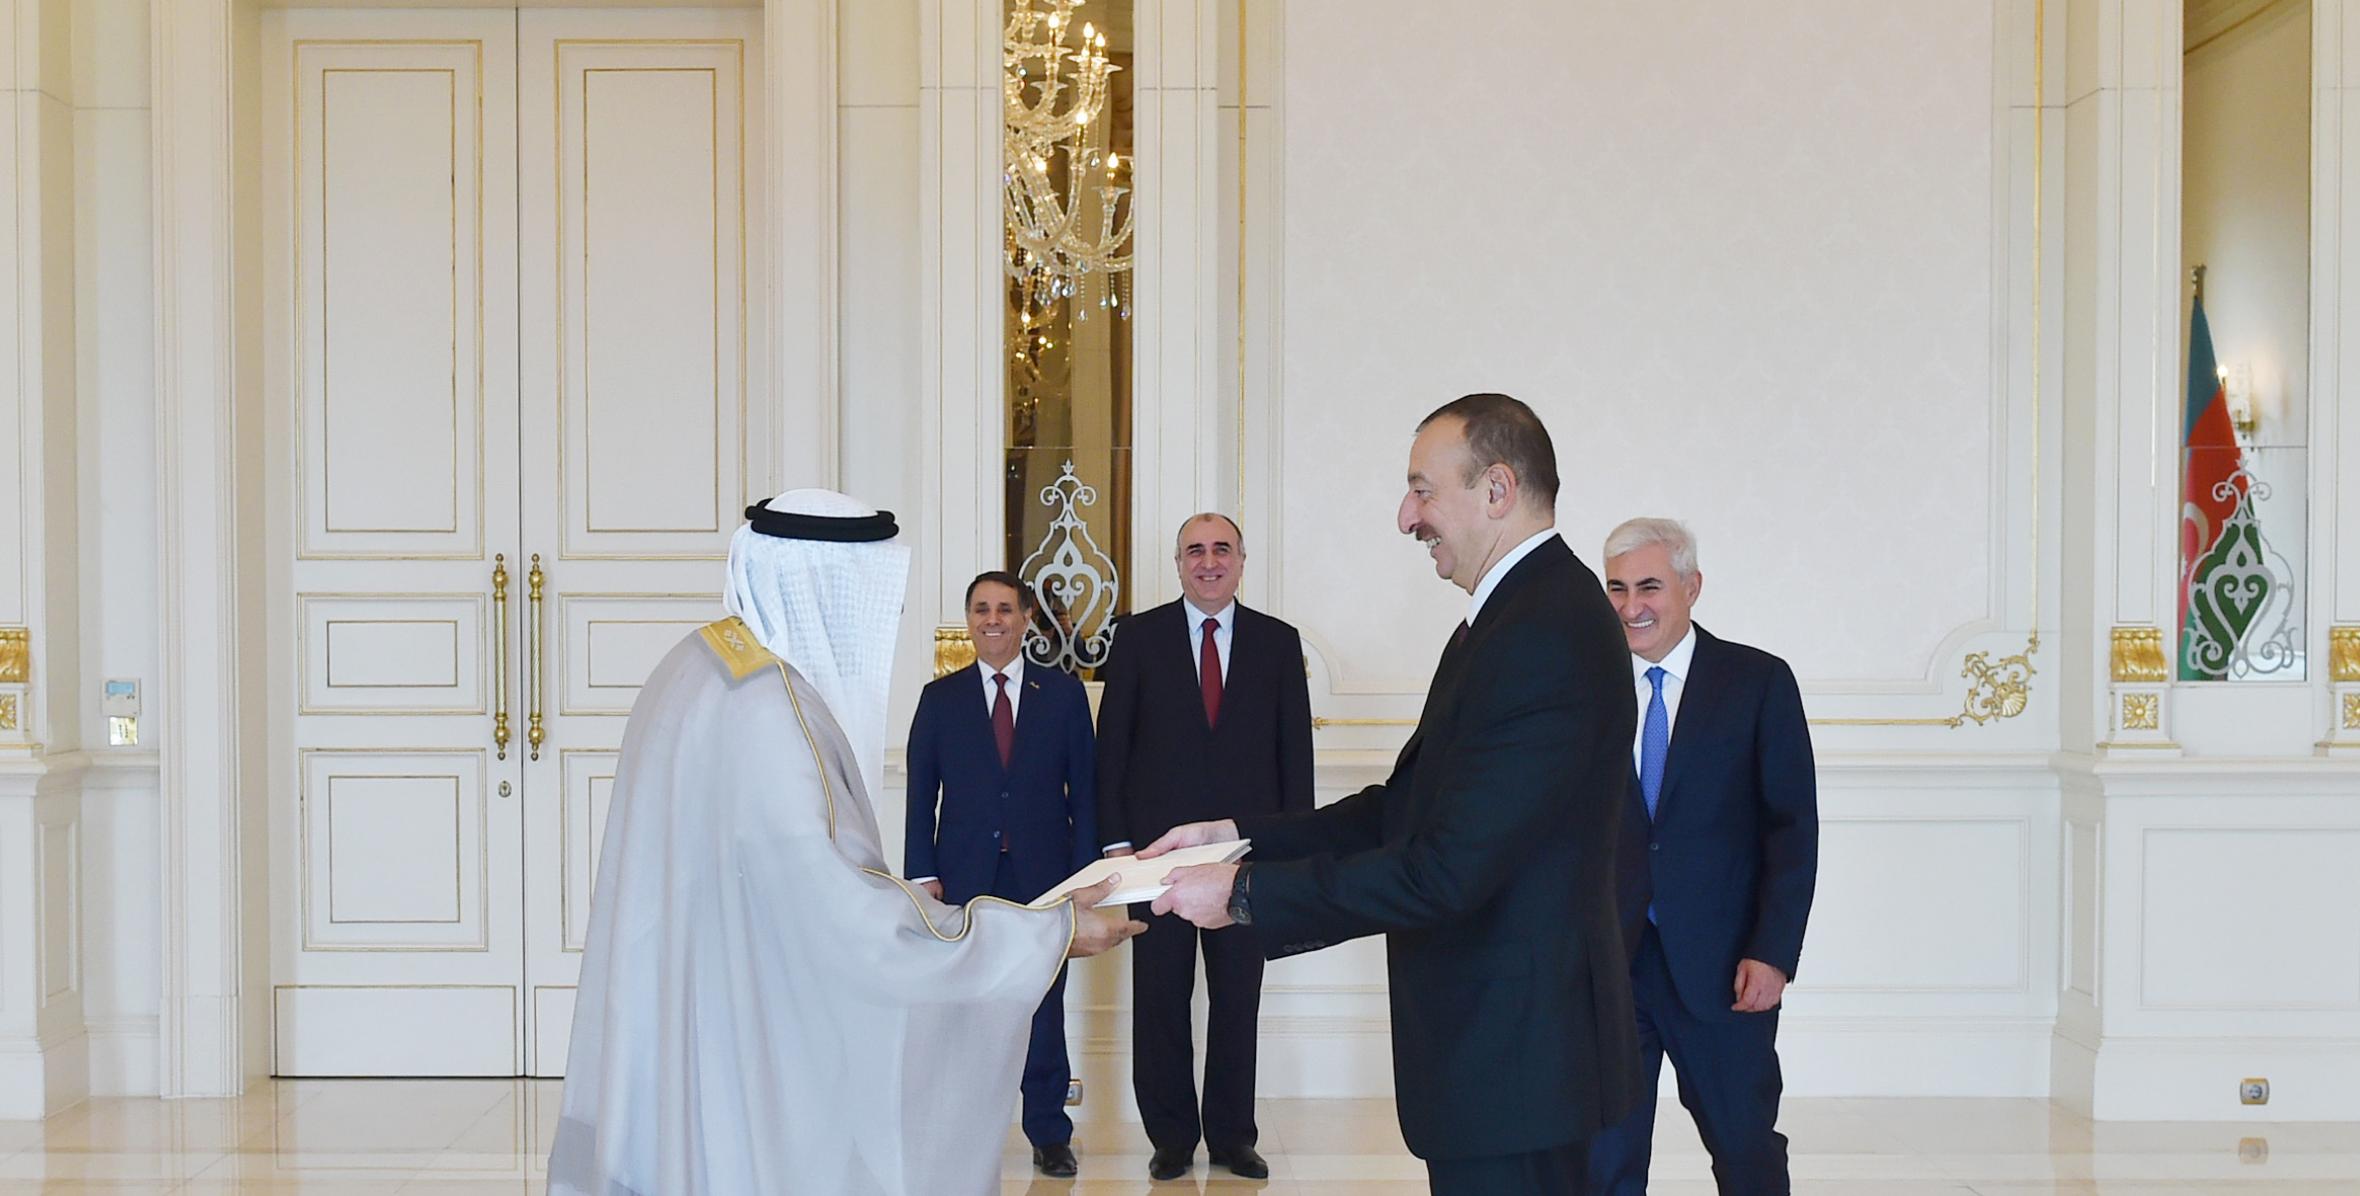 Ilham Aliyev received the credentials of the incoming UAE Ambassador